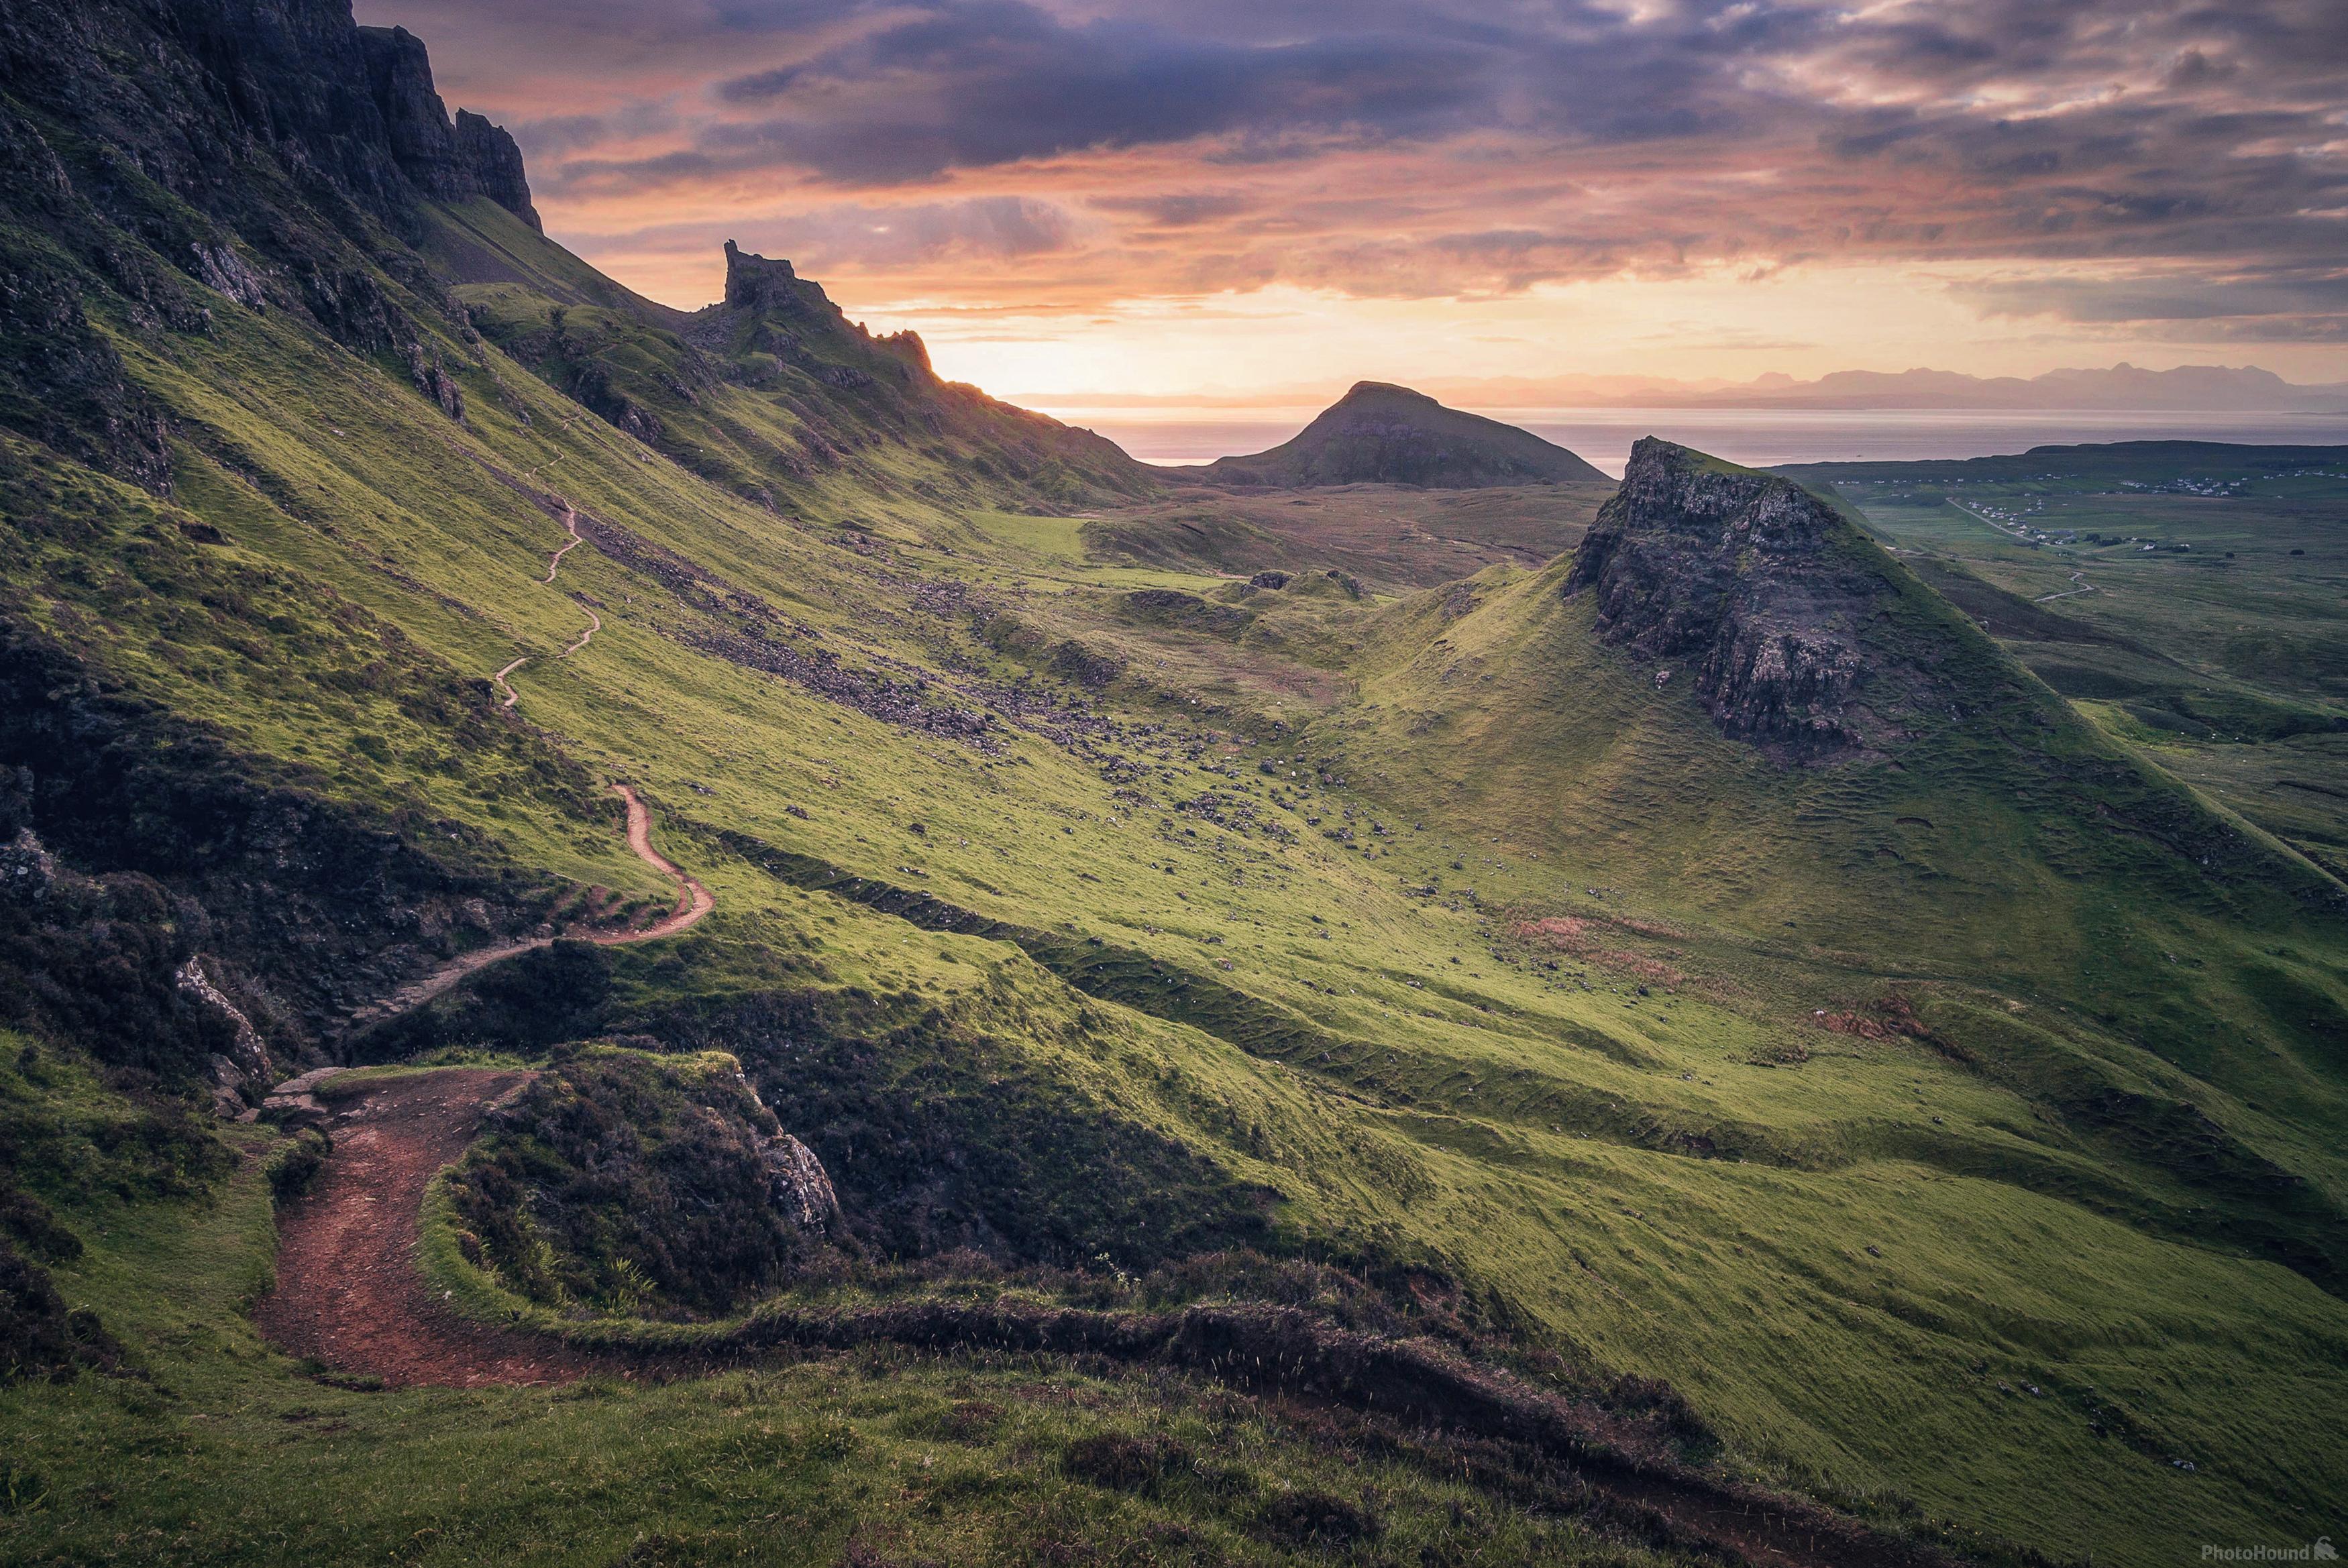 Image of The Quiraing by Robin Koehler